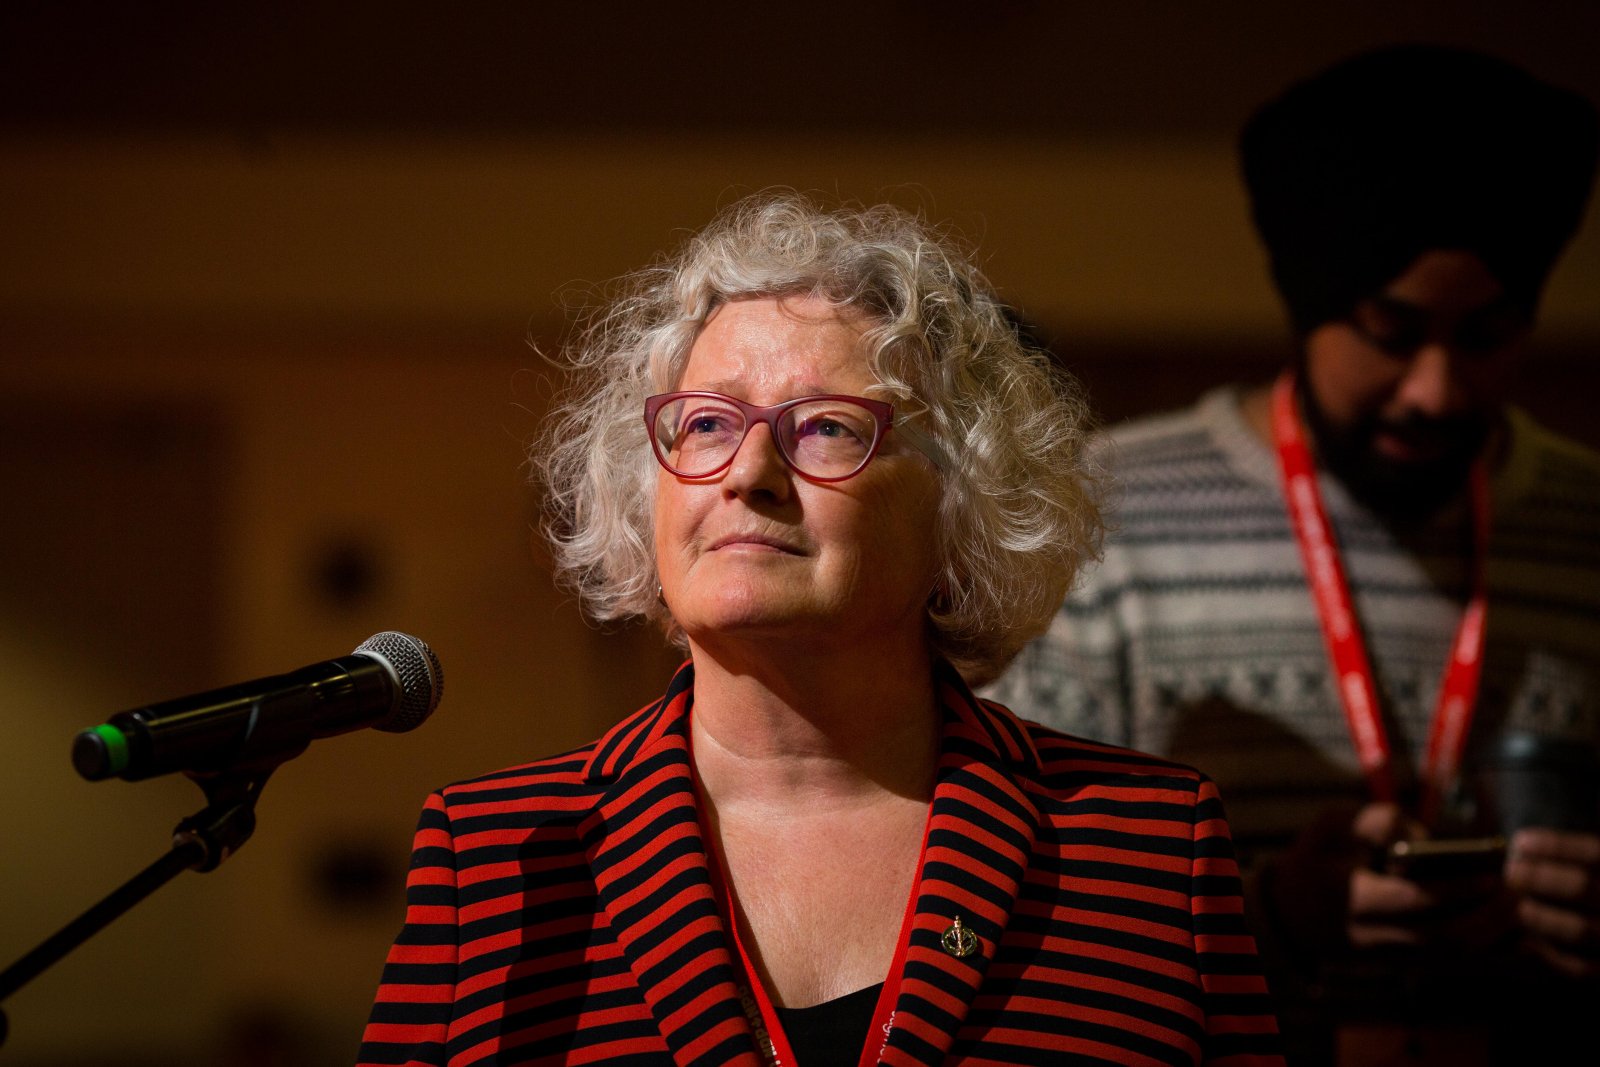 Edmonton-Strathcona NDP MP Linda Duncan spoke to a party resolution to strengthen environmental laws at the NDP convention in Ottawa on Feb. 16, 2018. Photo by Alex Tétreault